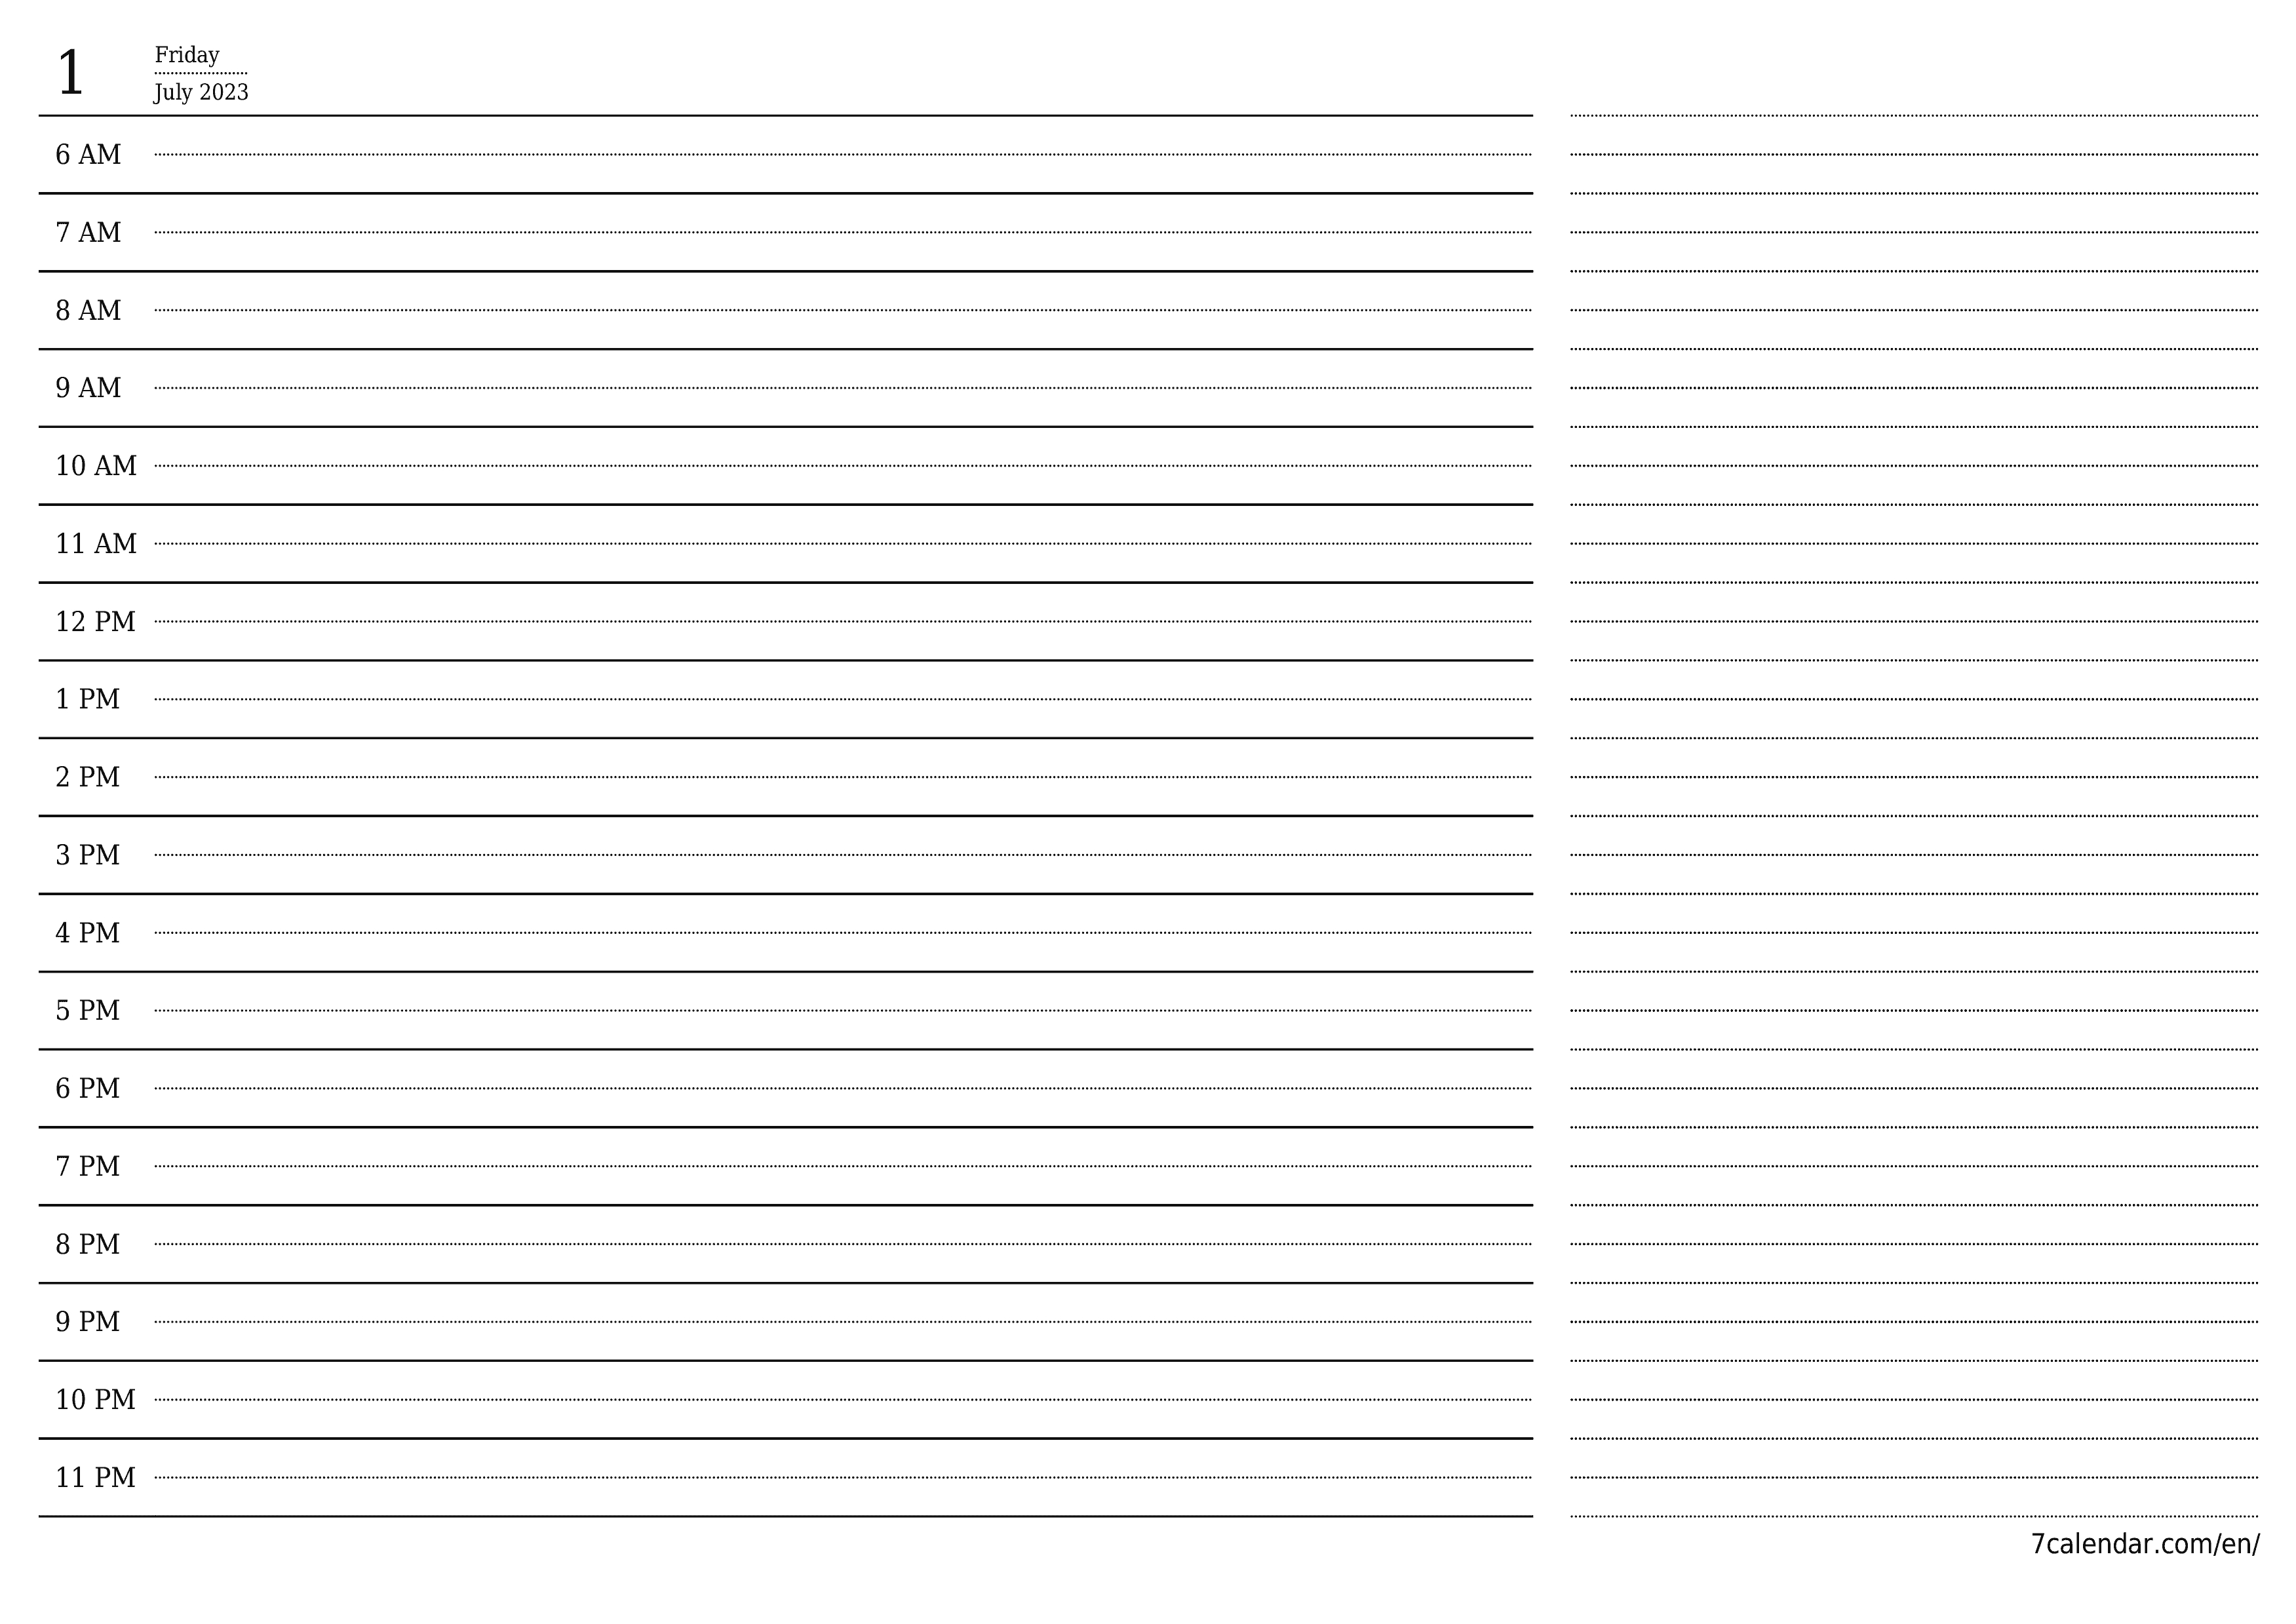 Blank daily printable calendar and planner for day July 2023 with notes, save and print to PDF PNG English - 7calendar.com